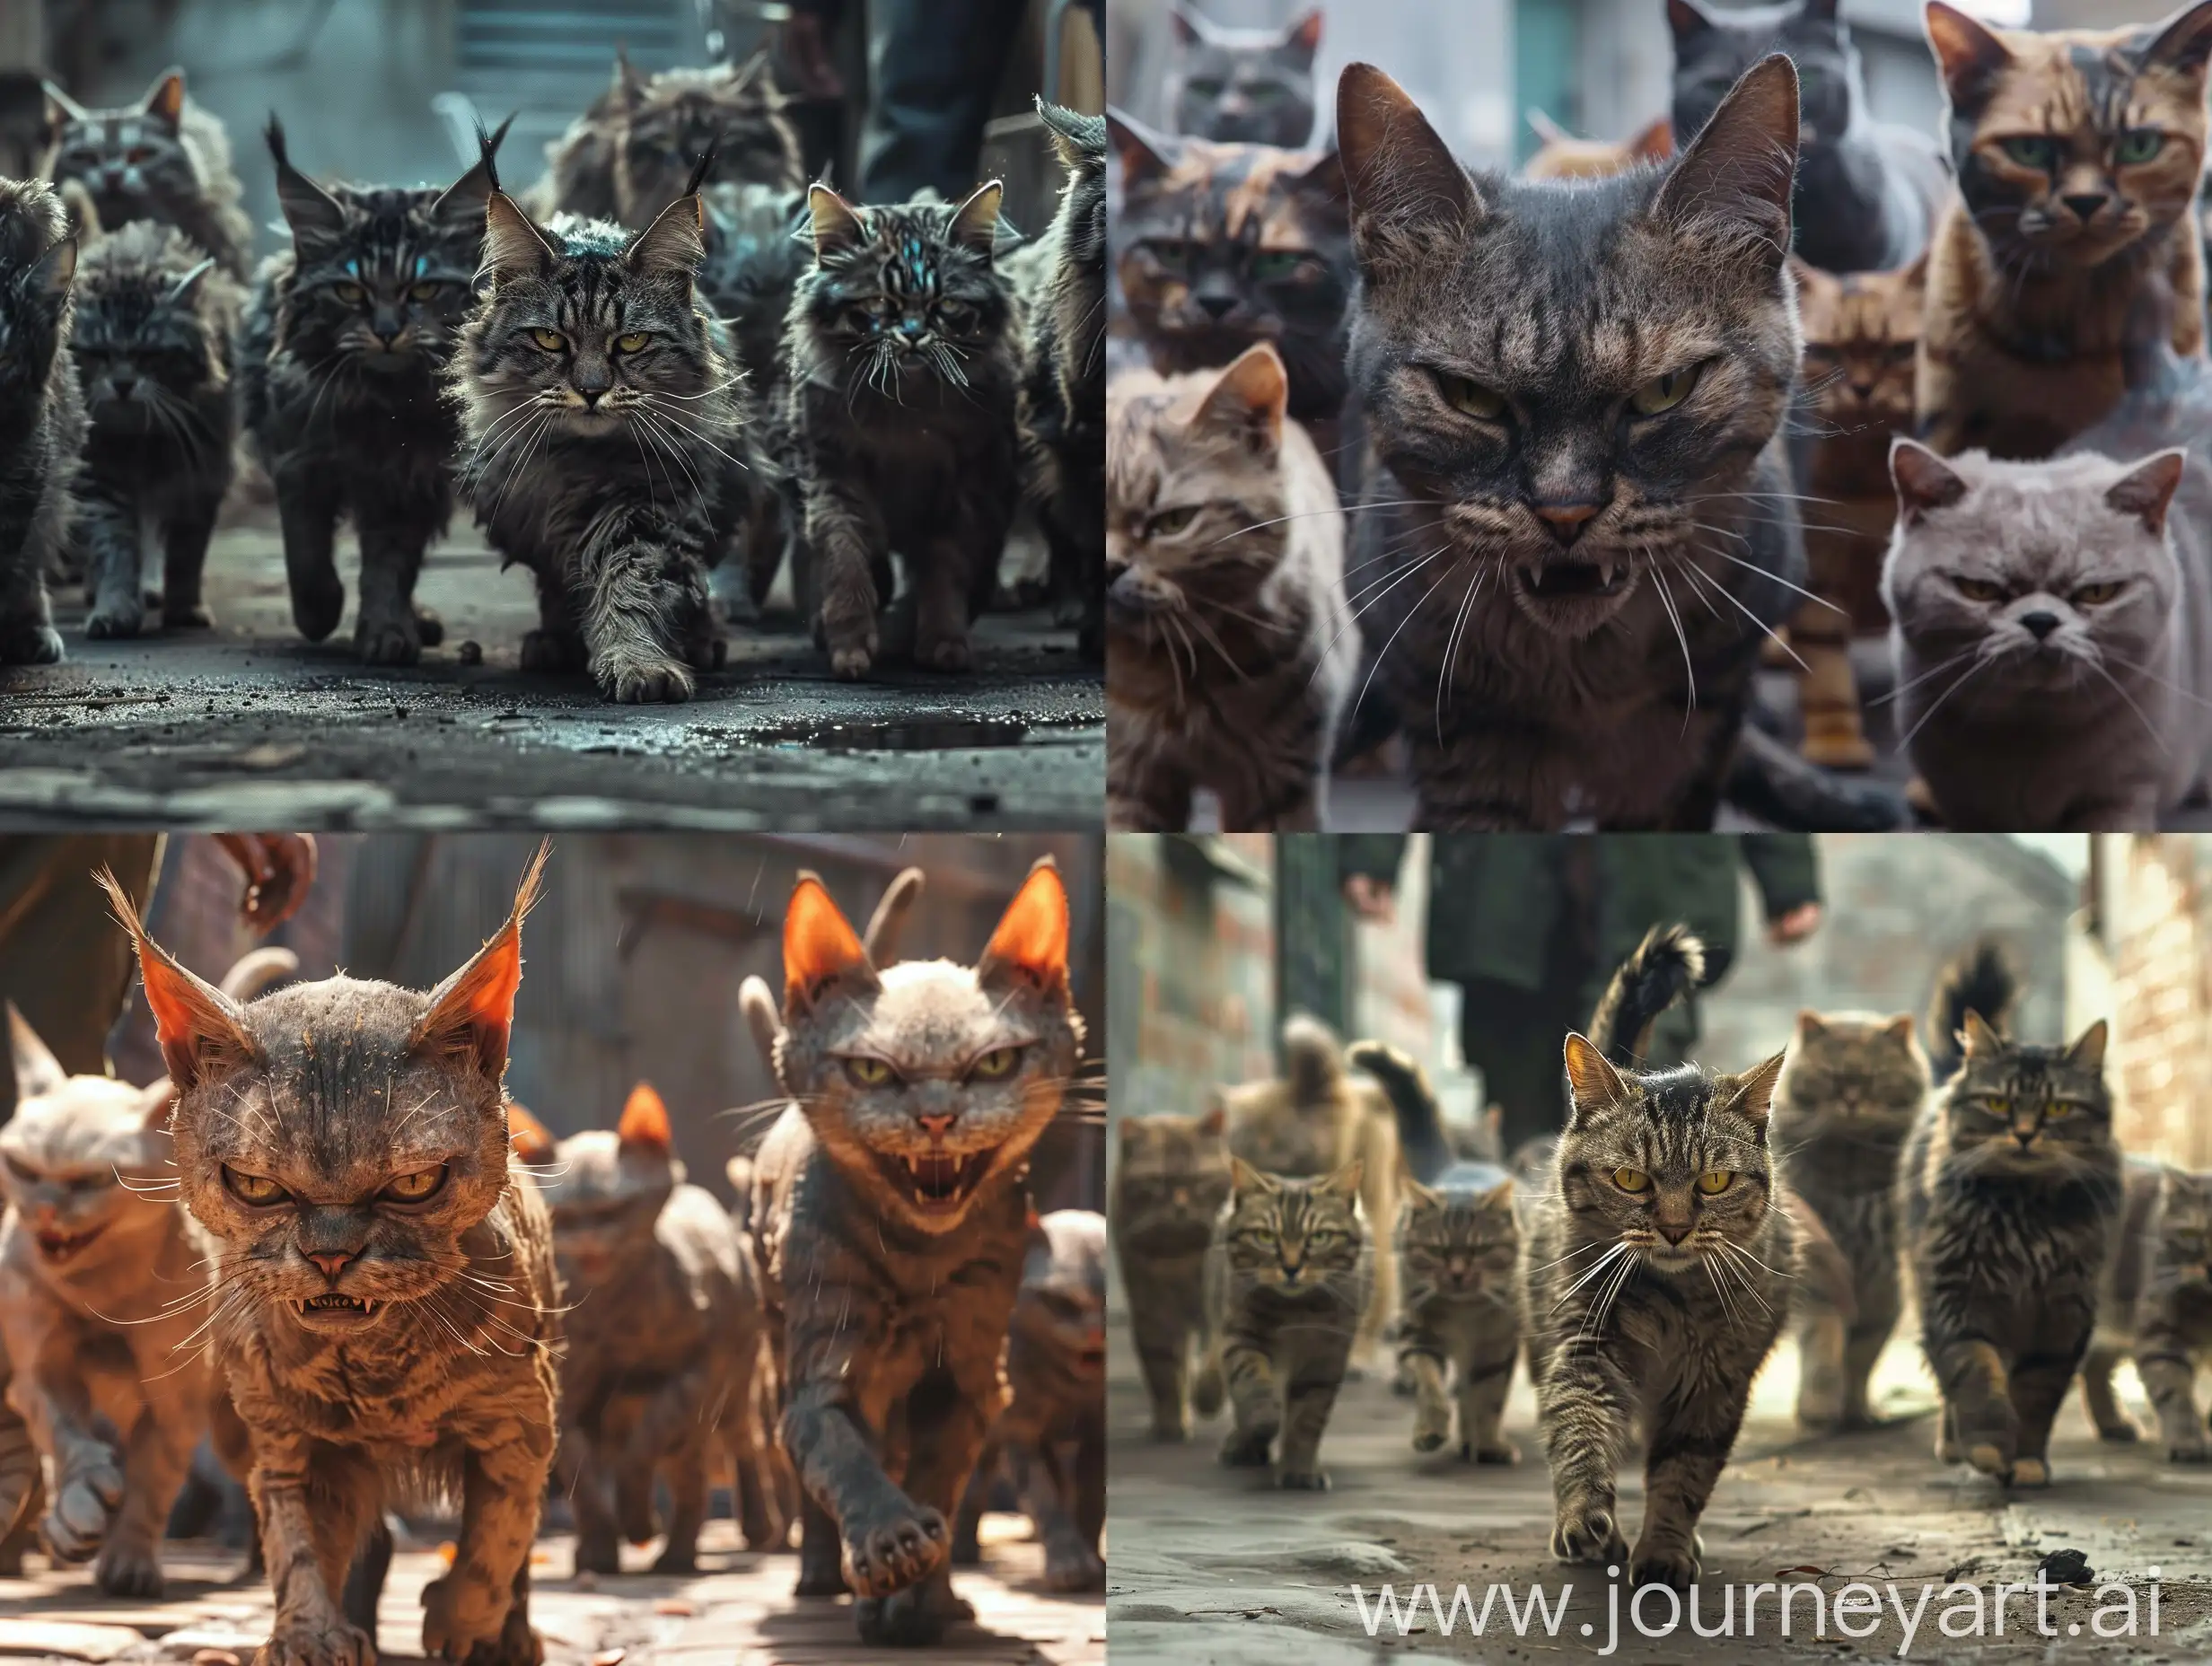 Menacing-Gang-of-Cats-Approaching-Viewer-in-Ultra-Realistic-8K-Resolution